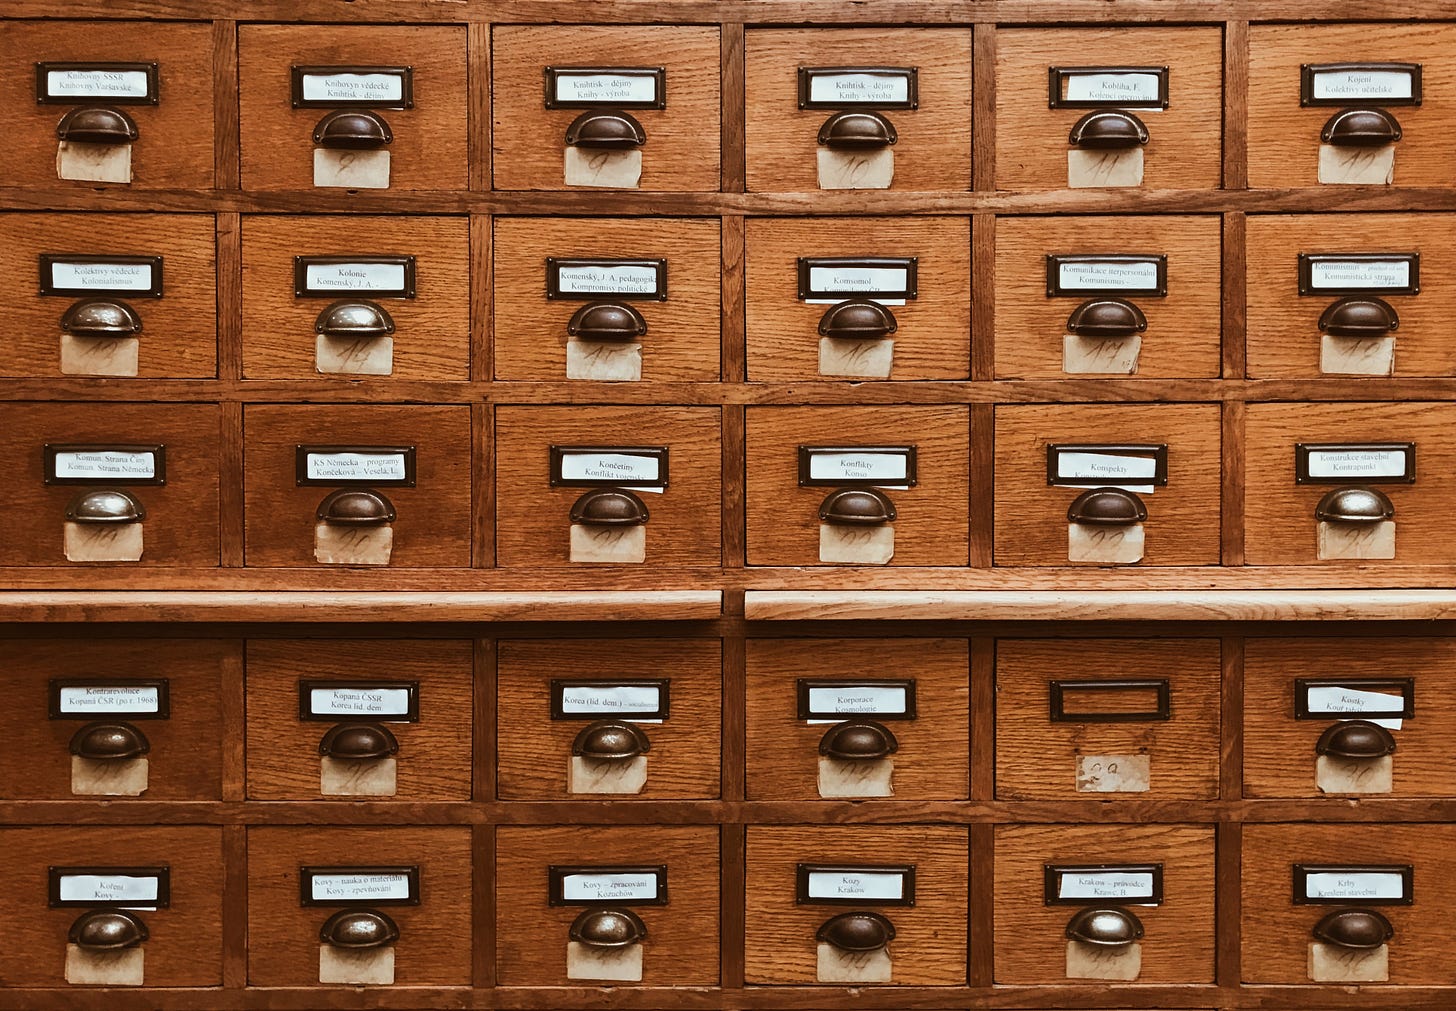 Old fashioned pull out file drawers with labels. Photo by Jan Antonin Kolar on Unsplash